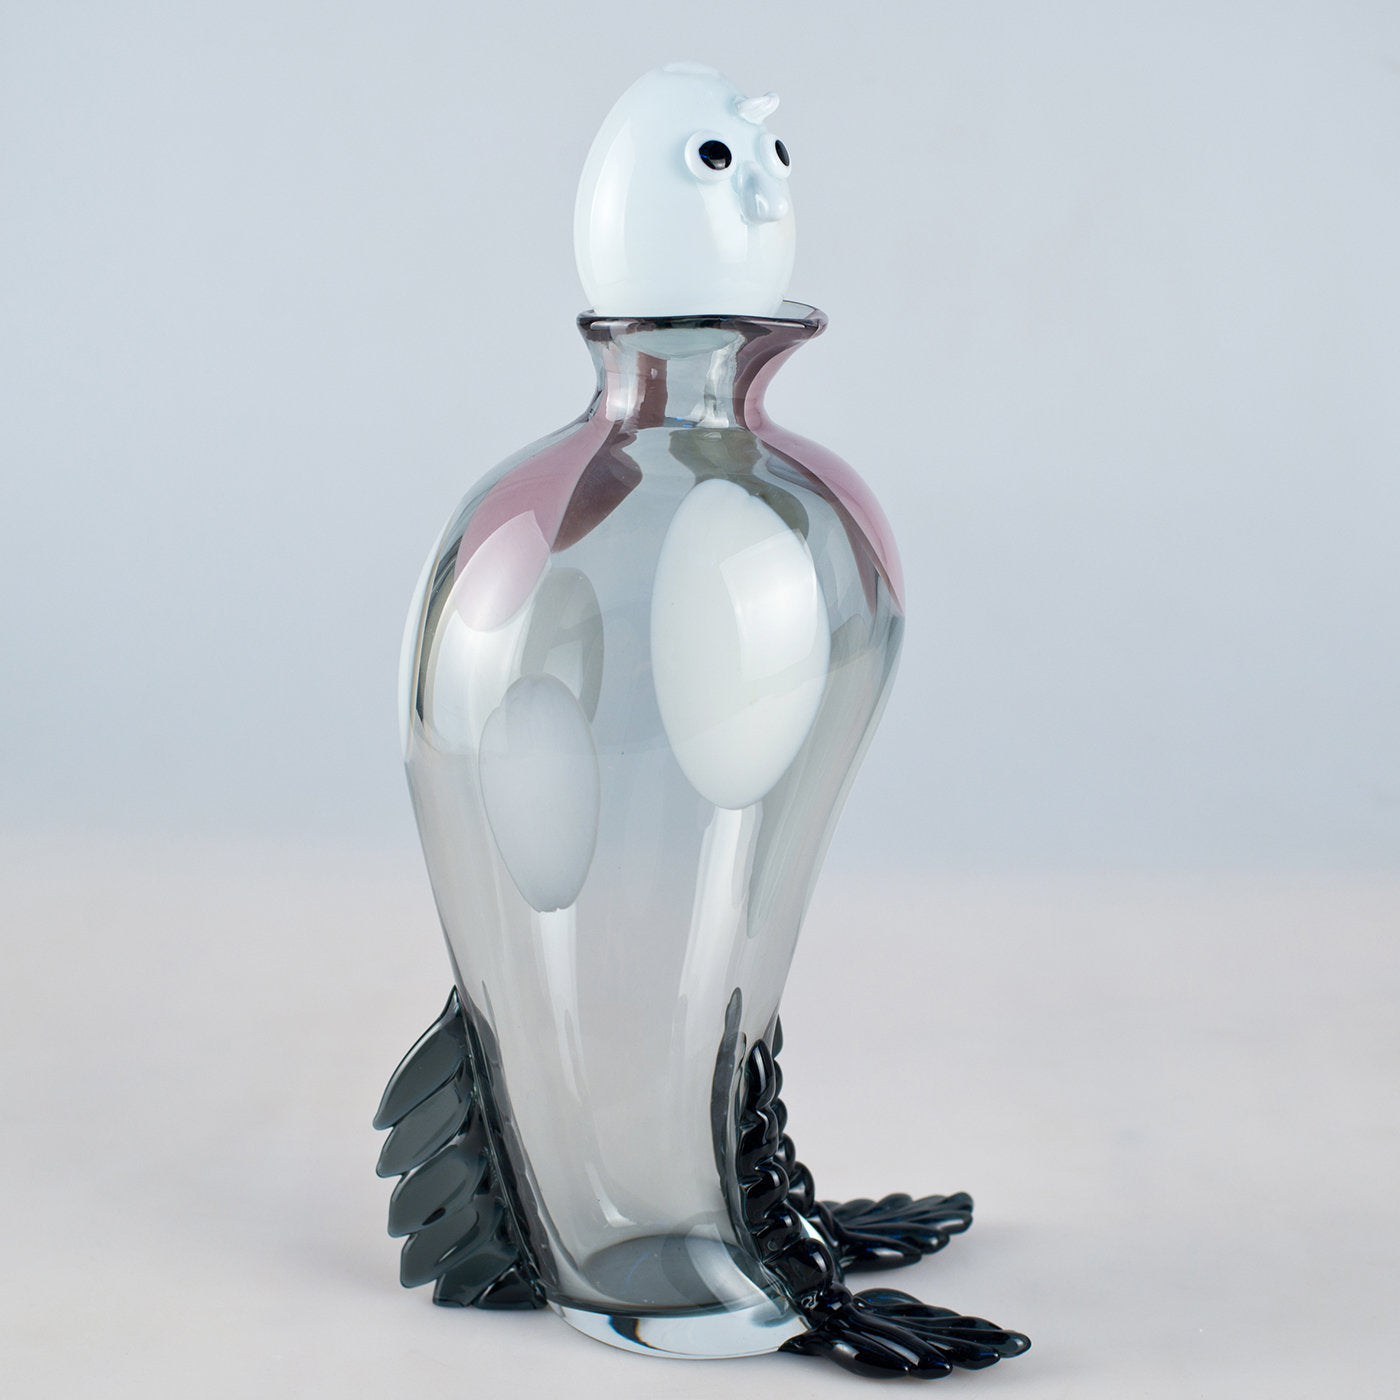 Spotted Pigeon Venetian Glass Sculpture by Eliana Gerotto - Alternative view 1